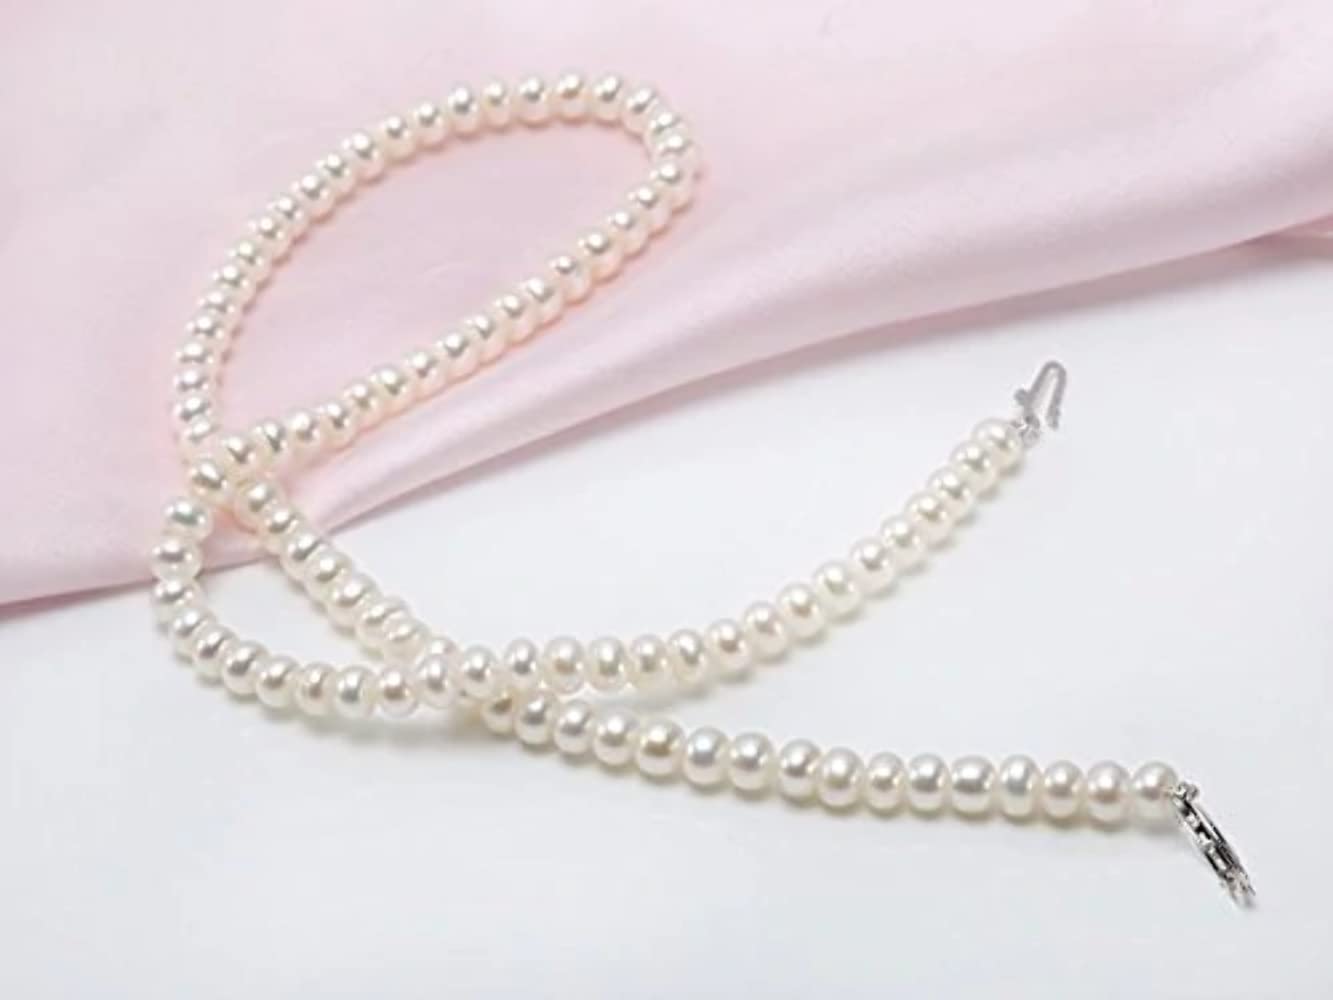 JYX Pearl Choker Necklace Small White 5mm Cultured Freshwater Pearl Necklace for Women 16